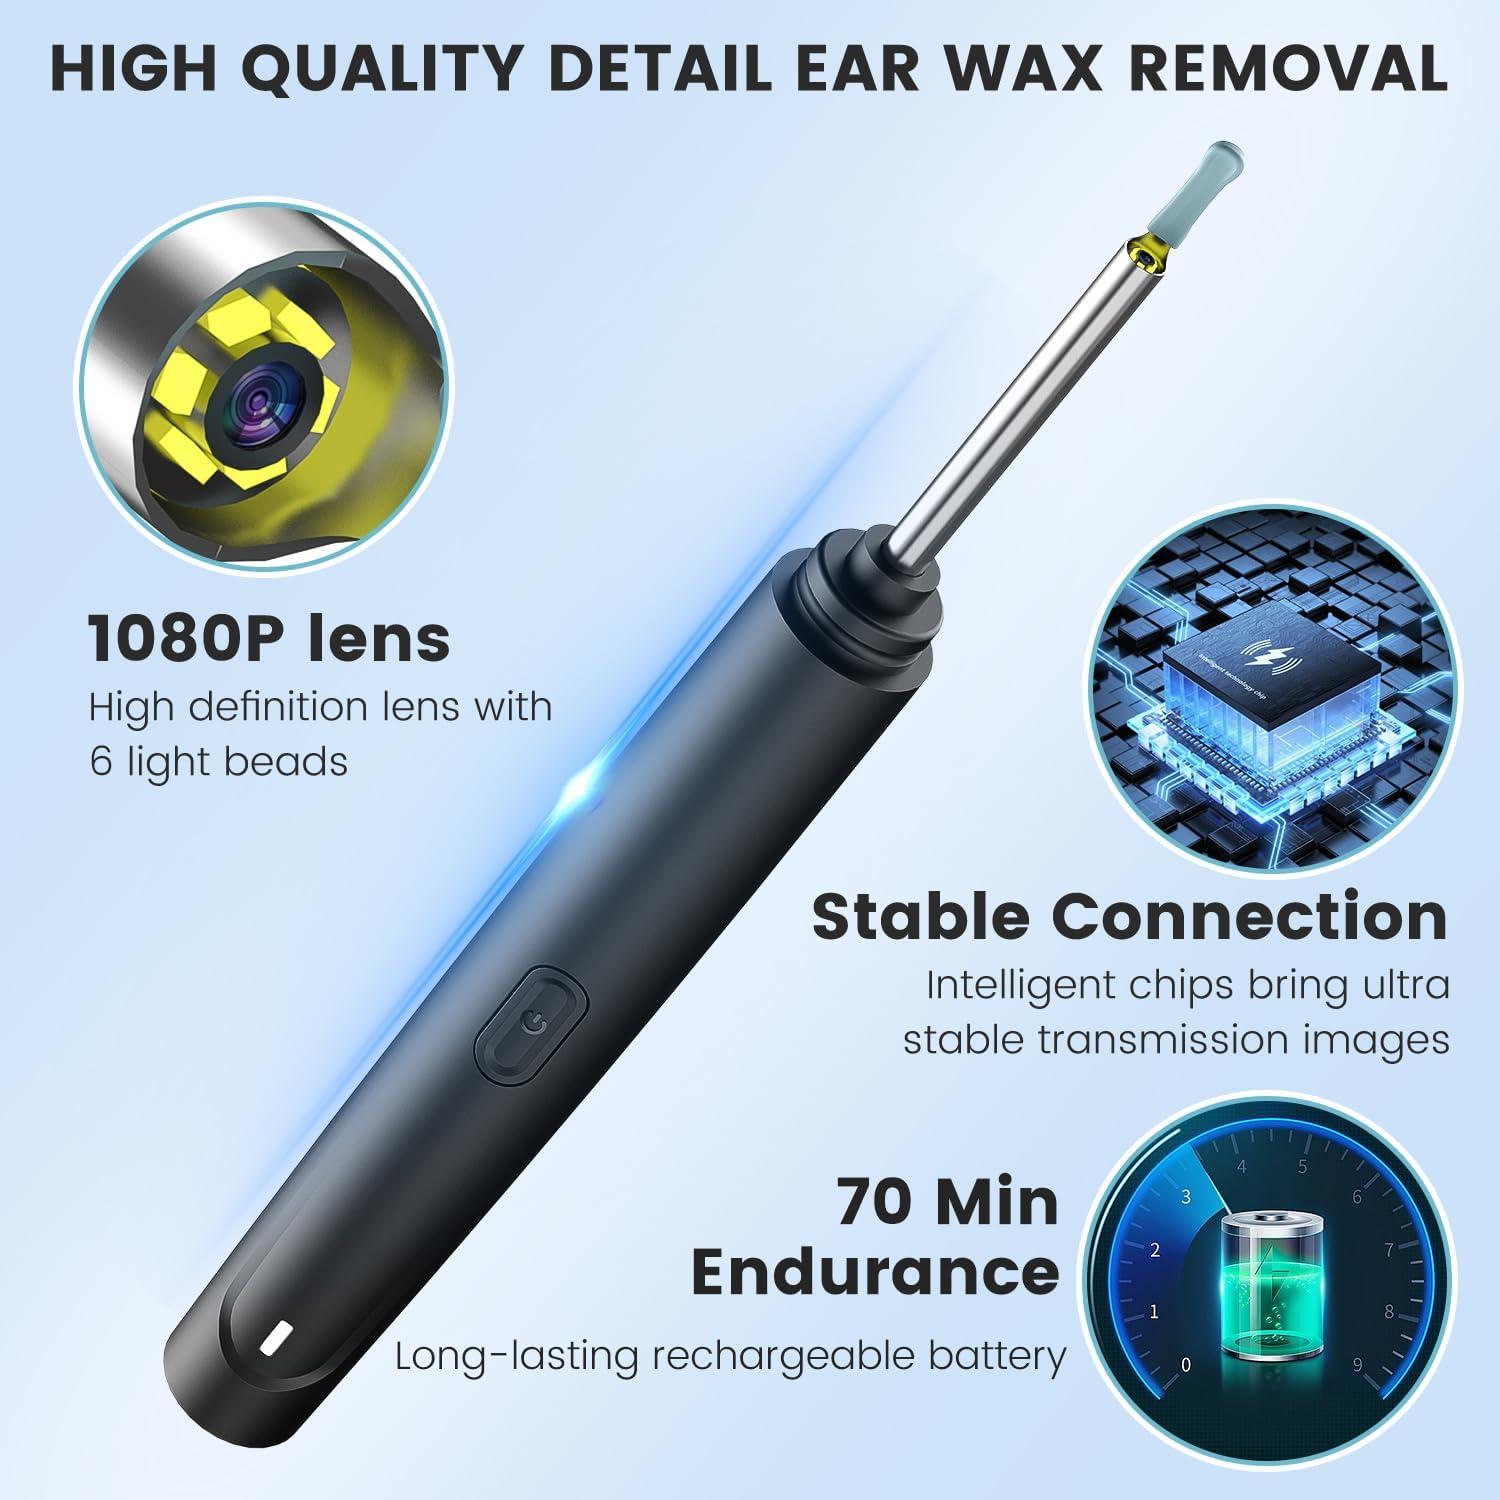 Ear Wax Removal Ear Cleaner with Camera 1080P HD Wireless Ear Otoscope with  6 LED Lights Earwax Remover Kit with 8 Pcs Ear Set Ear Wax Remowal Tool for  iPhone iPad Android Phones